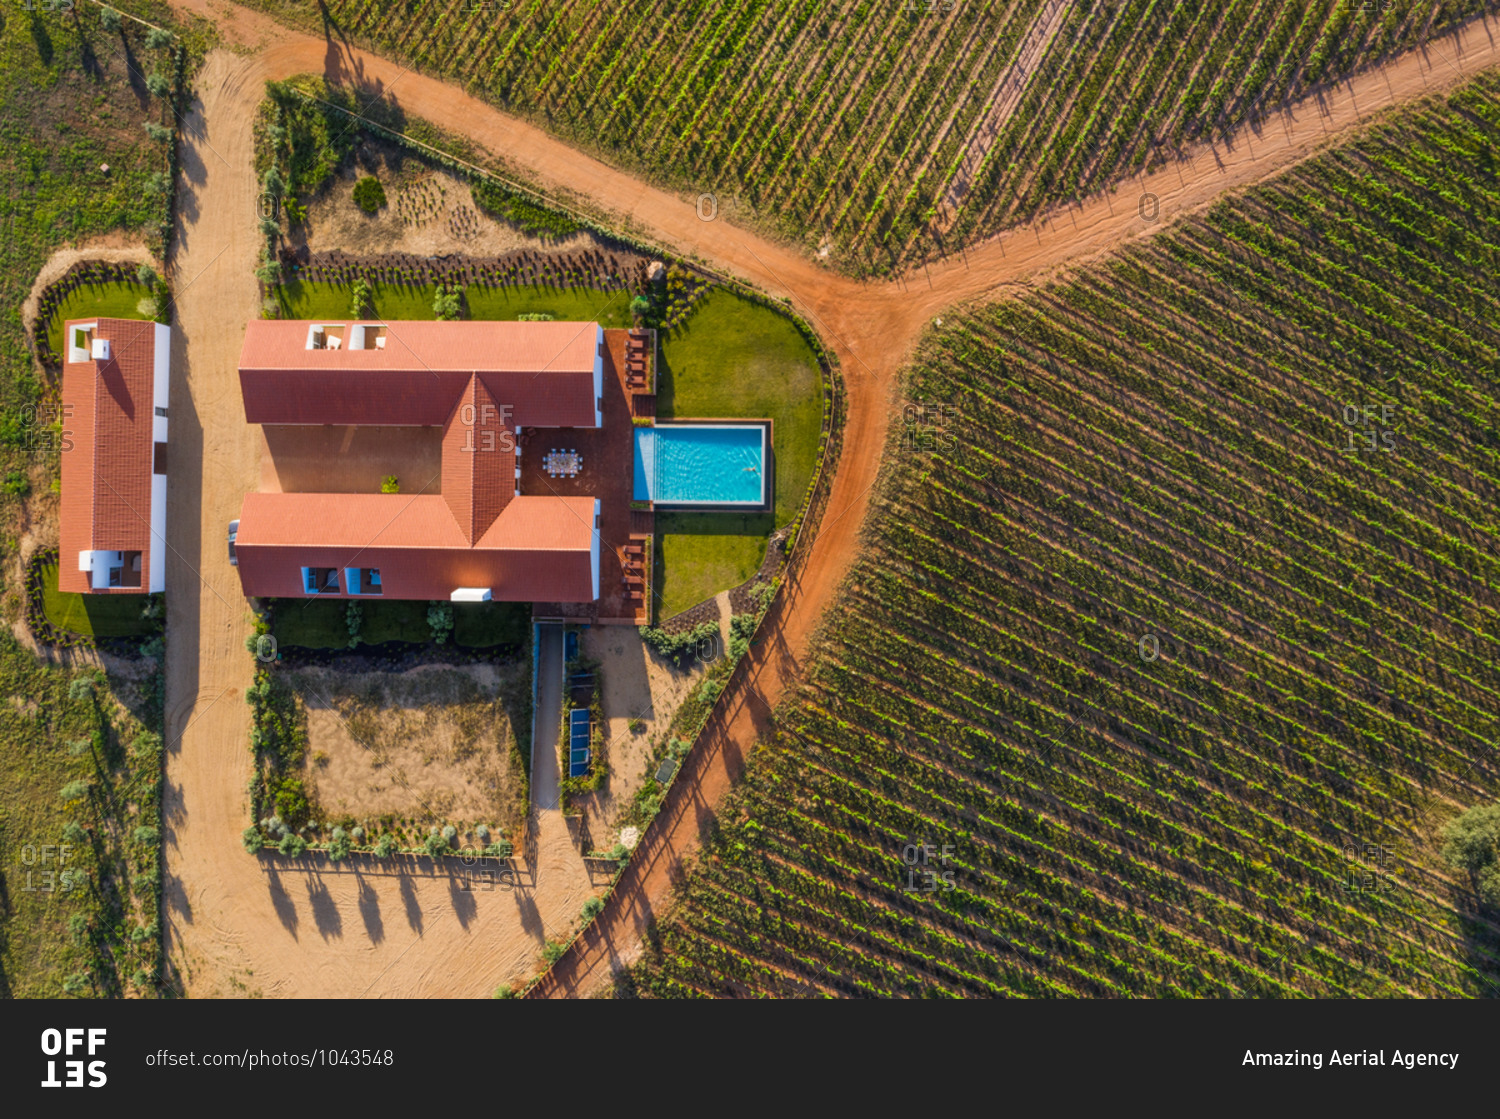 Aerial view of Vineyard estate with house and swimming pool, Albernoa, Portugal.